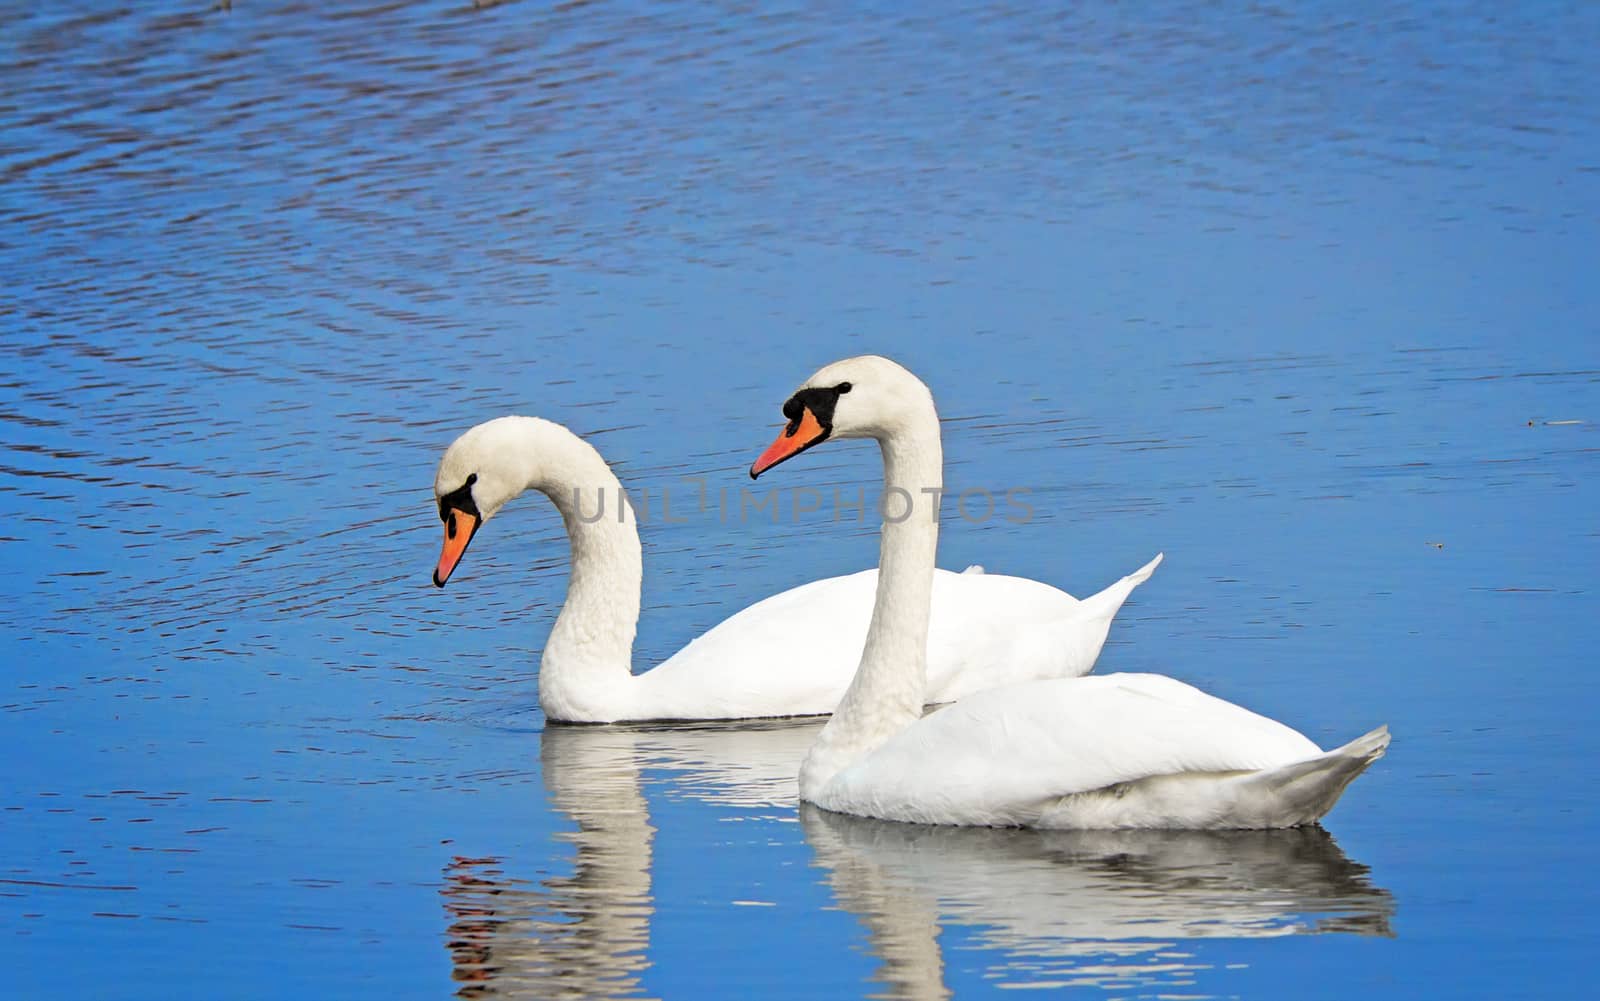 A pair of beautiful wild white swans floating on the blue surface of the lake.